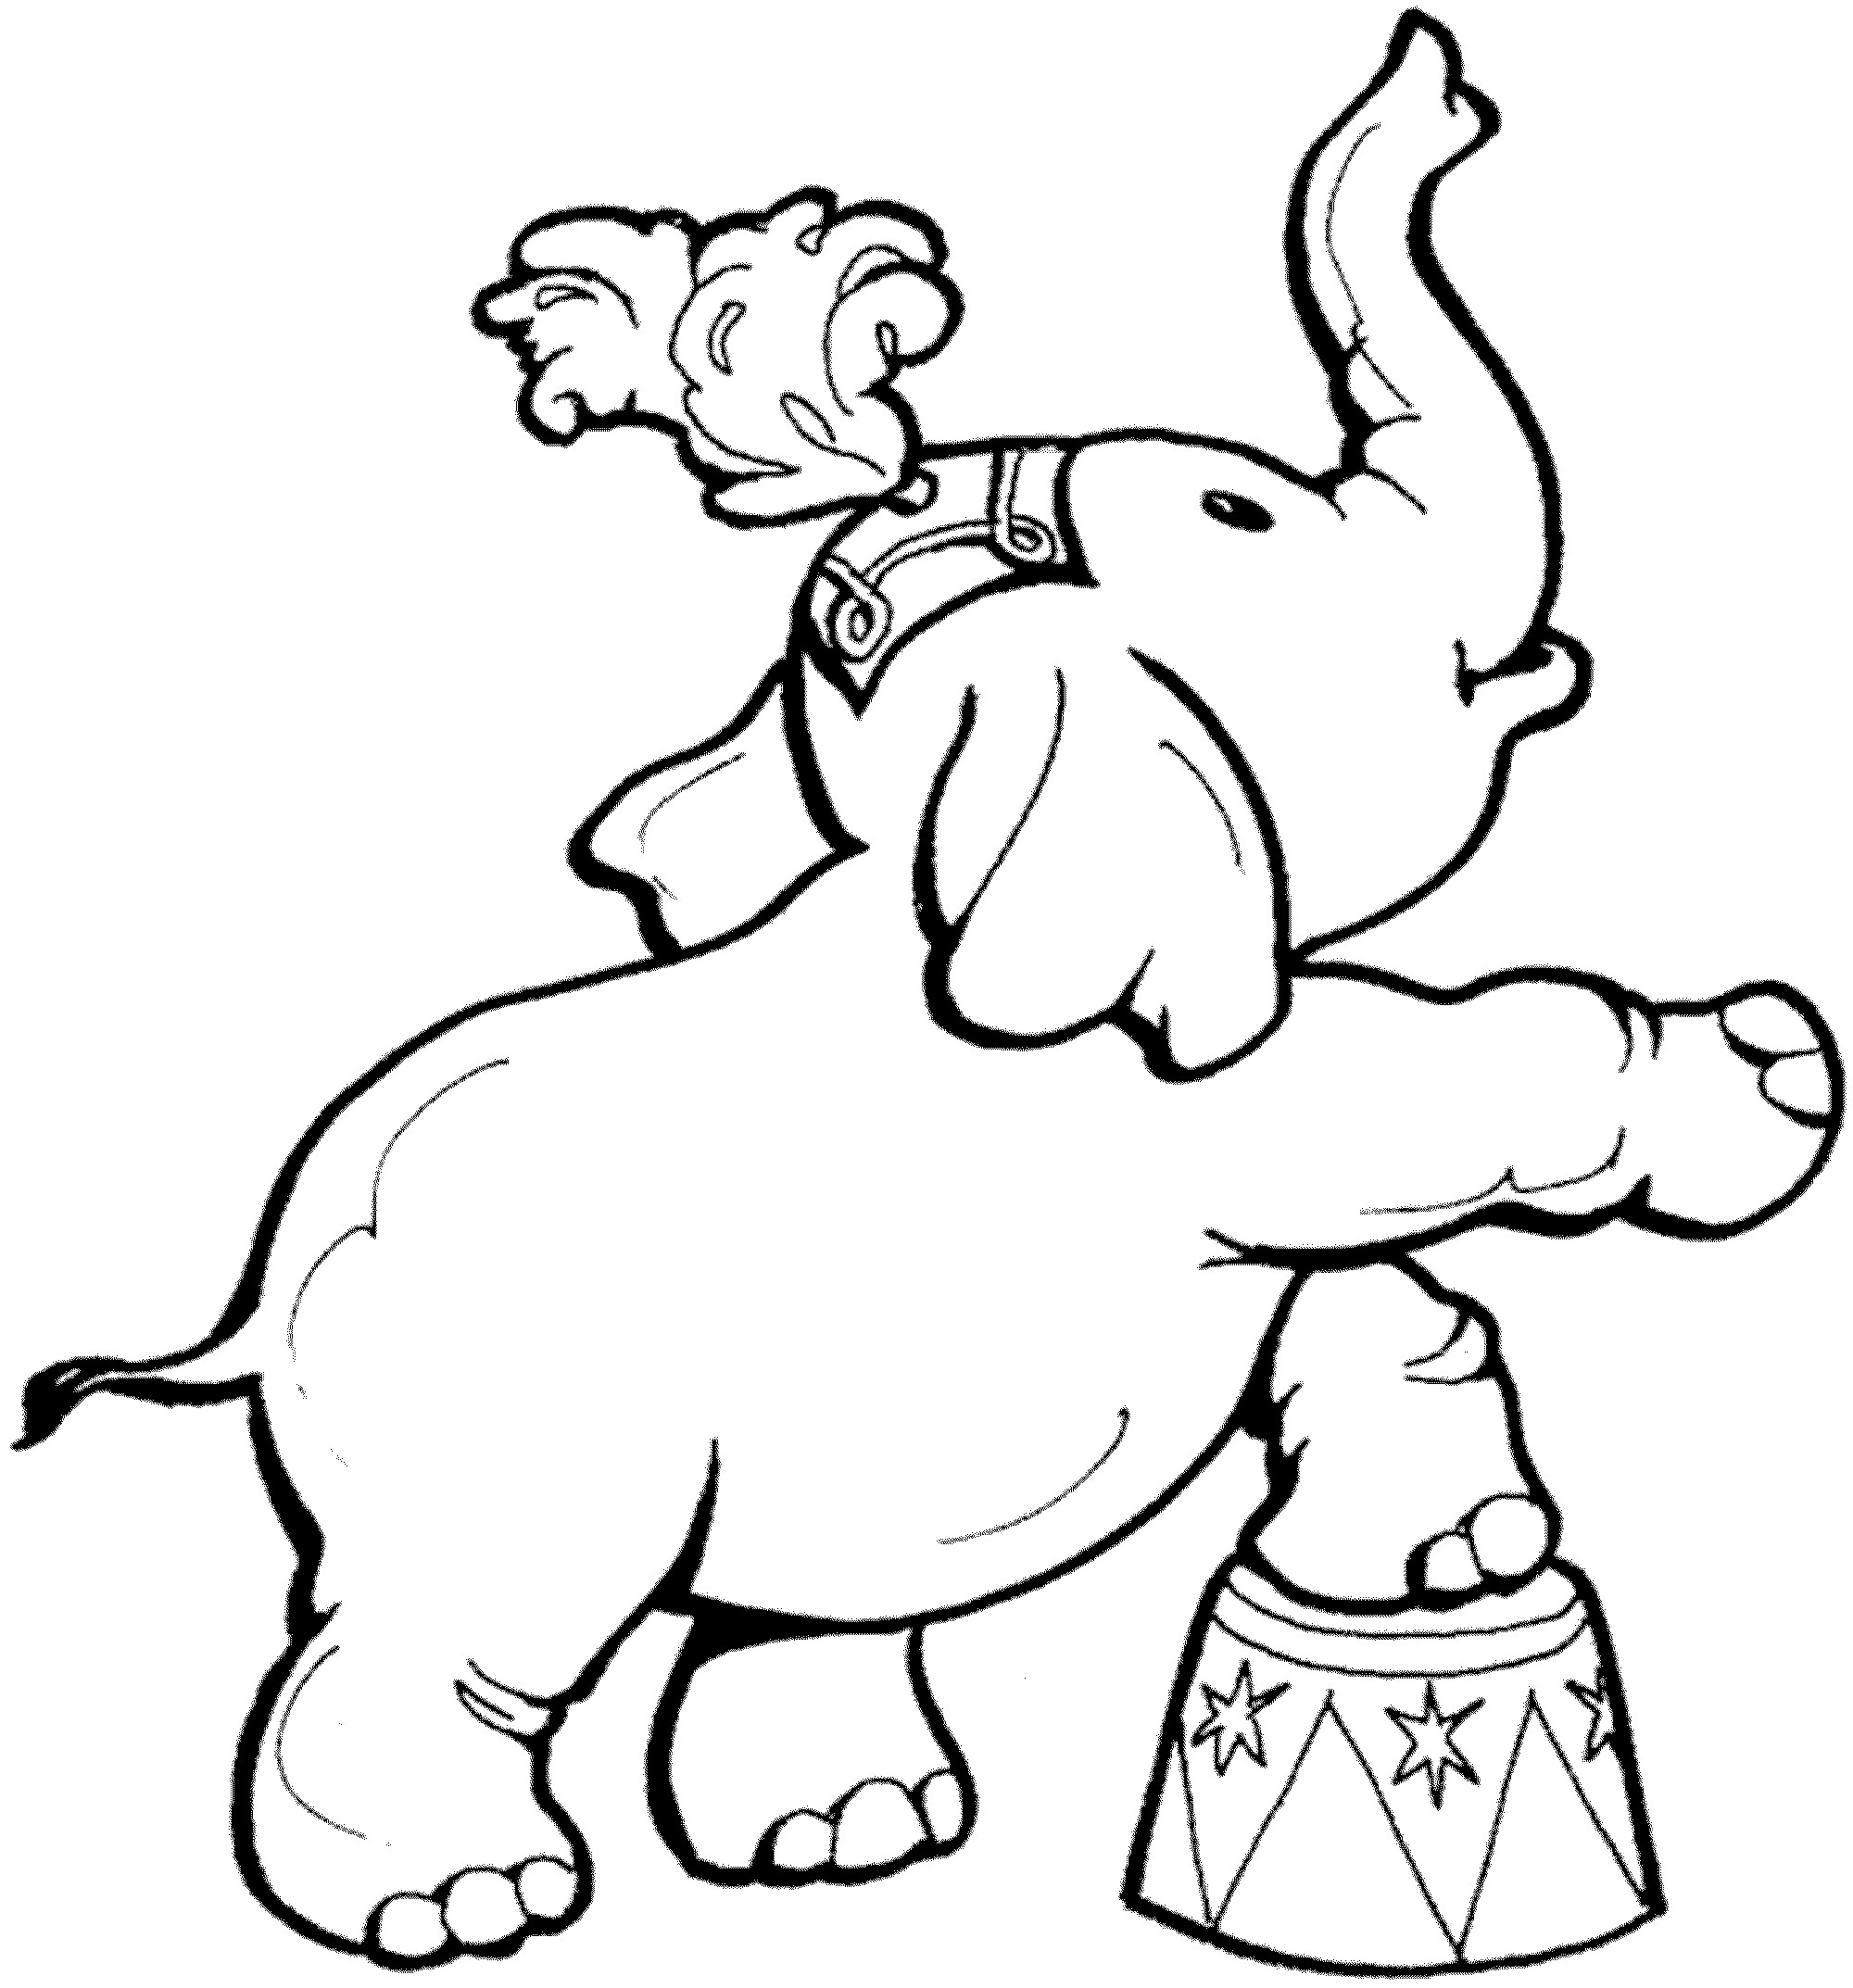 Elephant Coloring Book Pages
 coloring page elephant